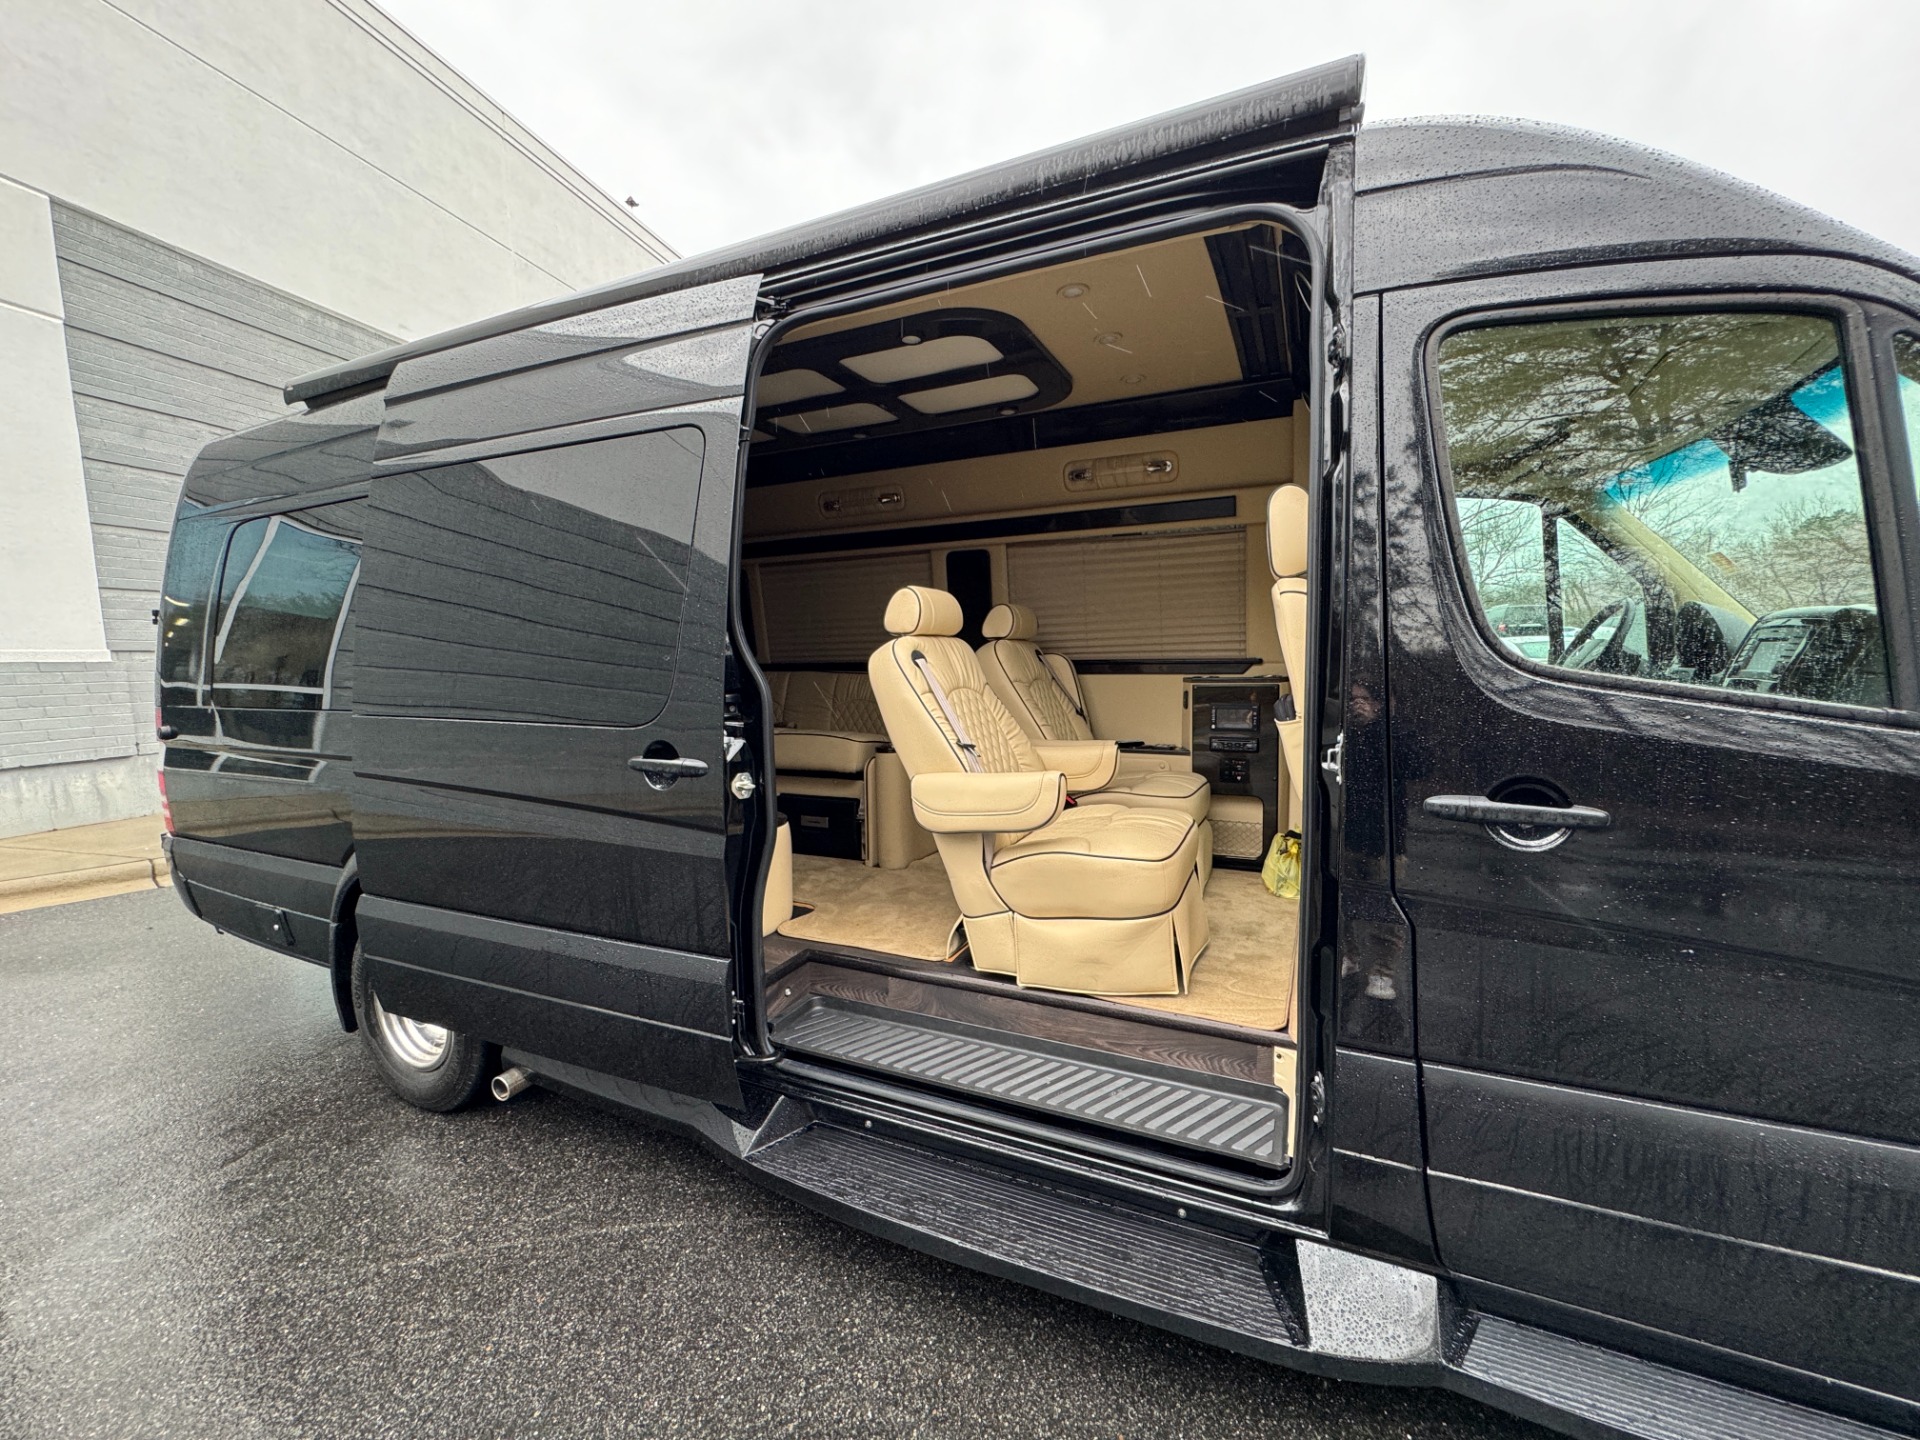 Used 2017 Mercedes-Benz Sprinter Cargo Van MIDWEST JET VAN CONVERSION for sale $120,000 at Formula Imports in Charlotte NC 28227 43